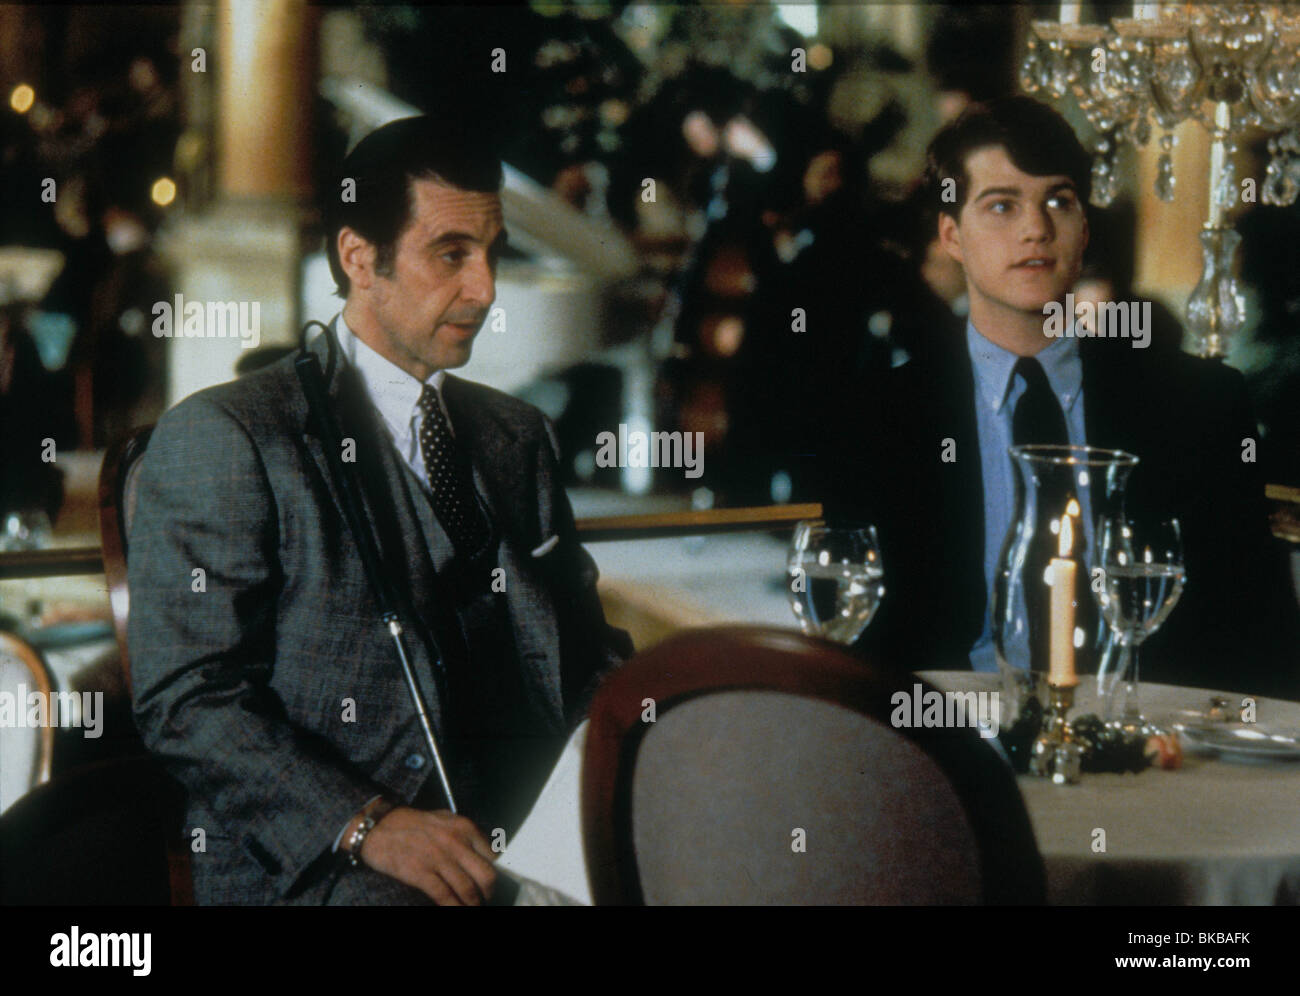 SCENT OF A WOMAN (1992) AL PACINO, CHRIS O'DONNELL SCW 012 H Stock Photo